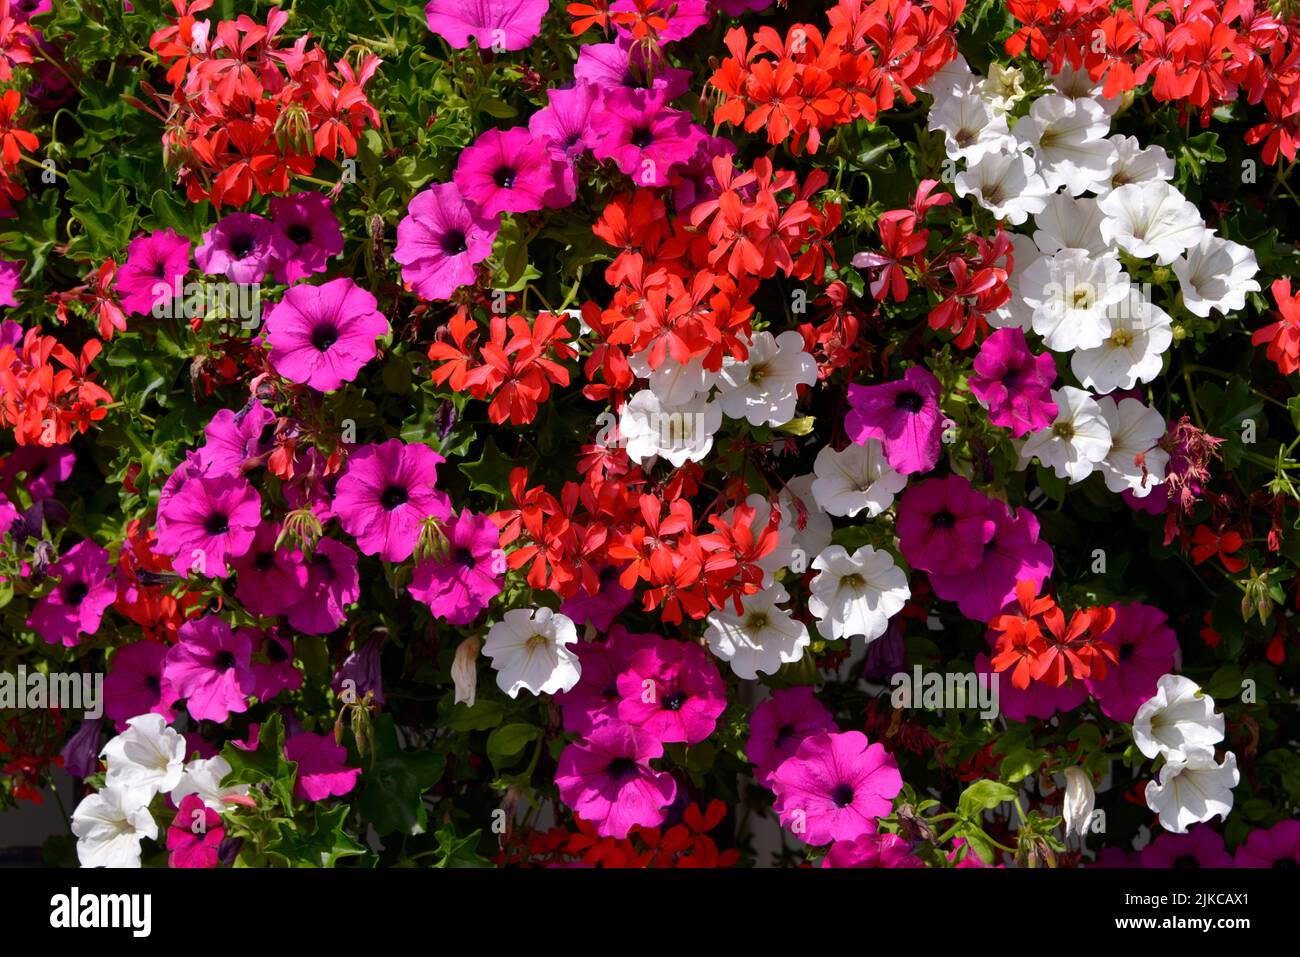 Blooming white petunia and red geraniums flowers with hair grass Stock Photo